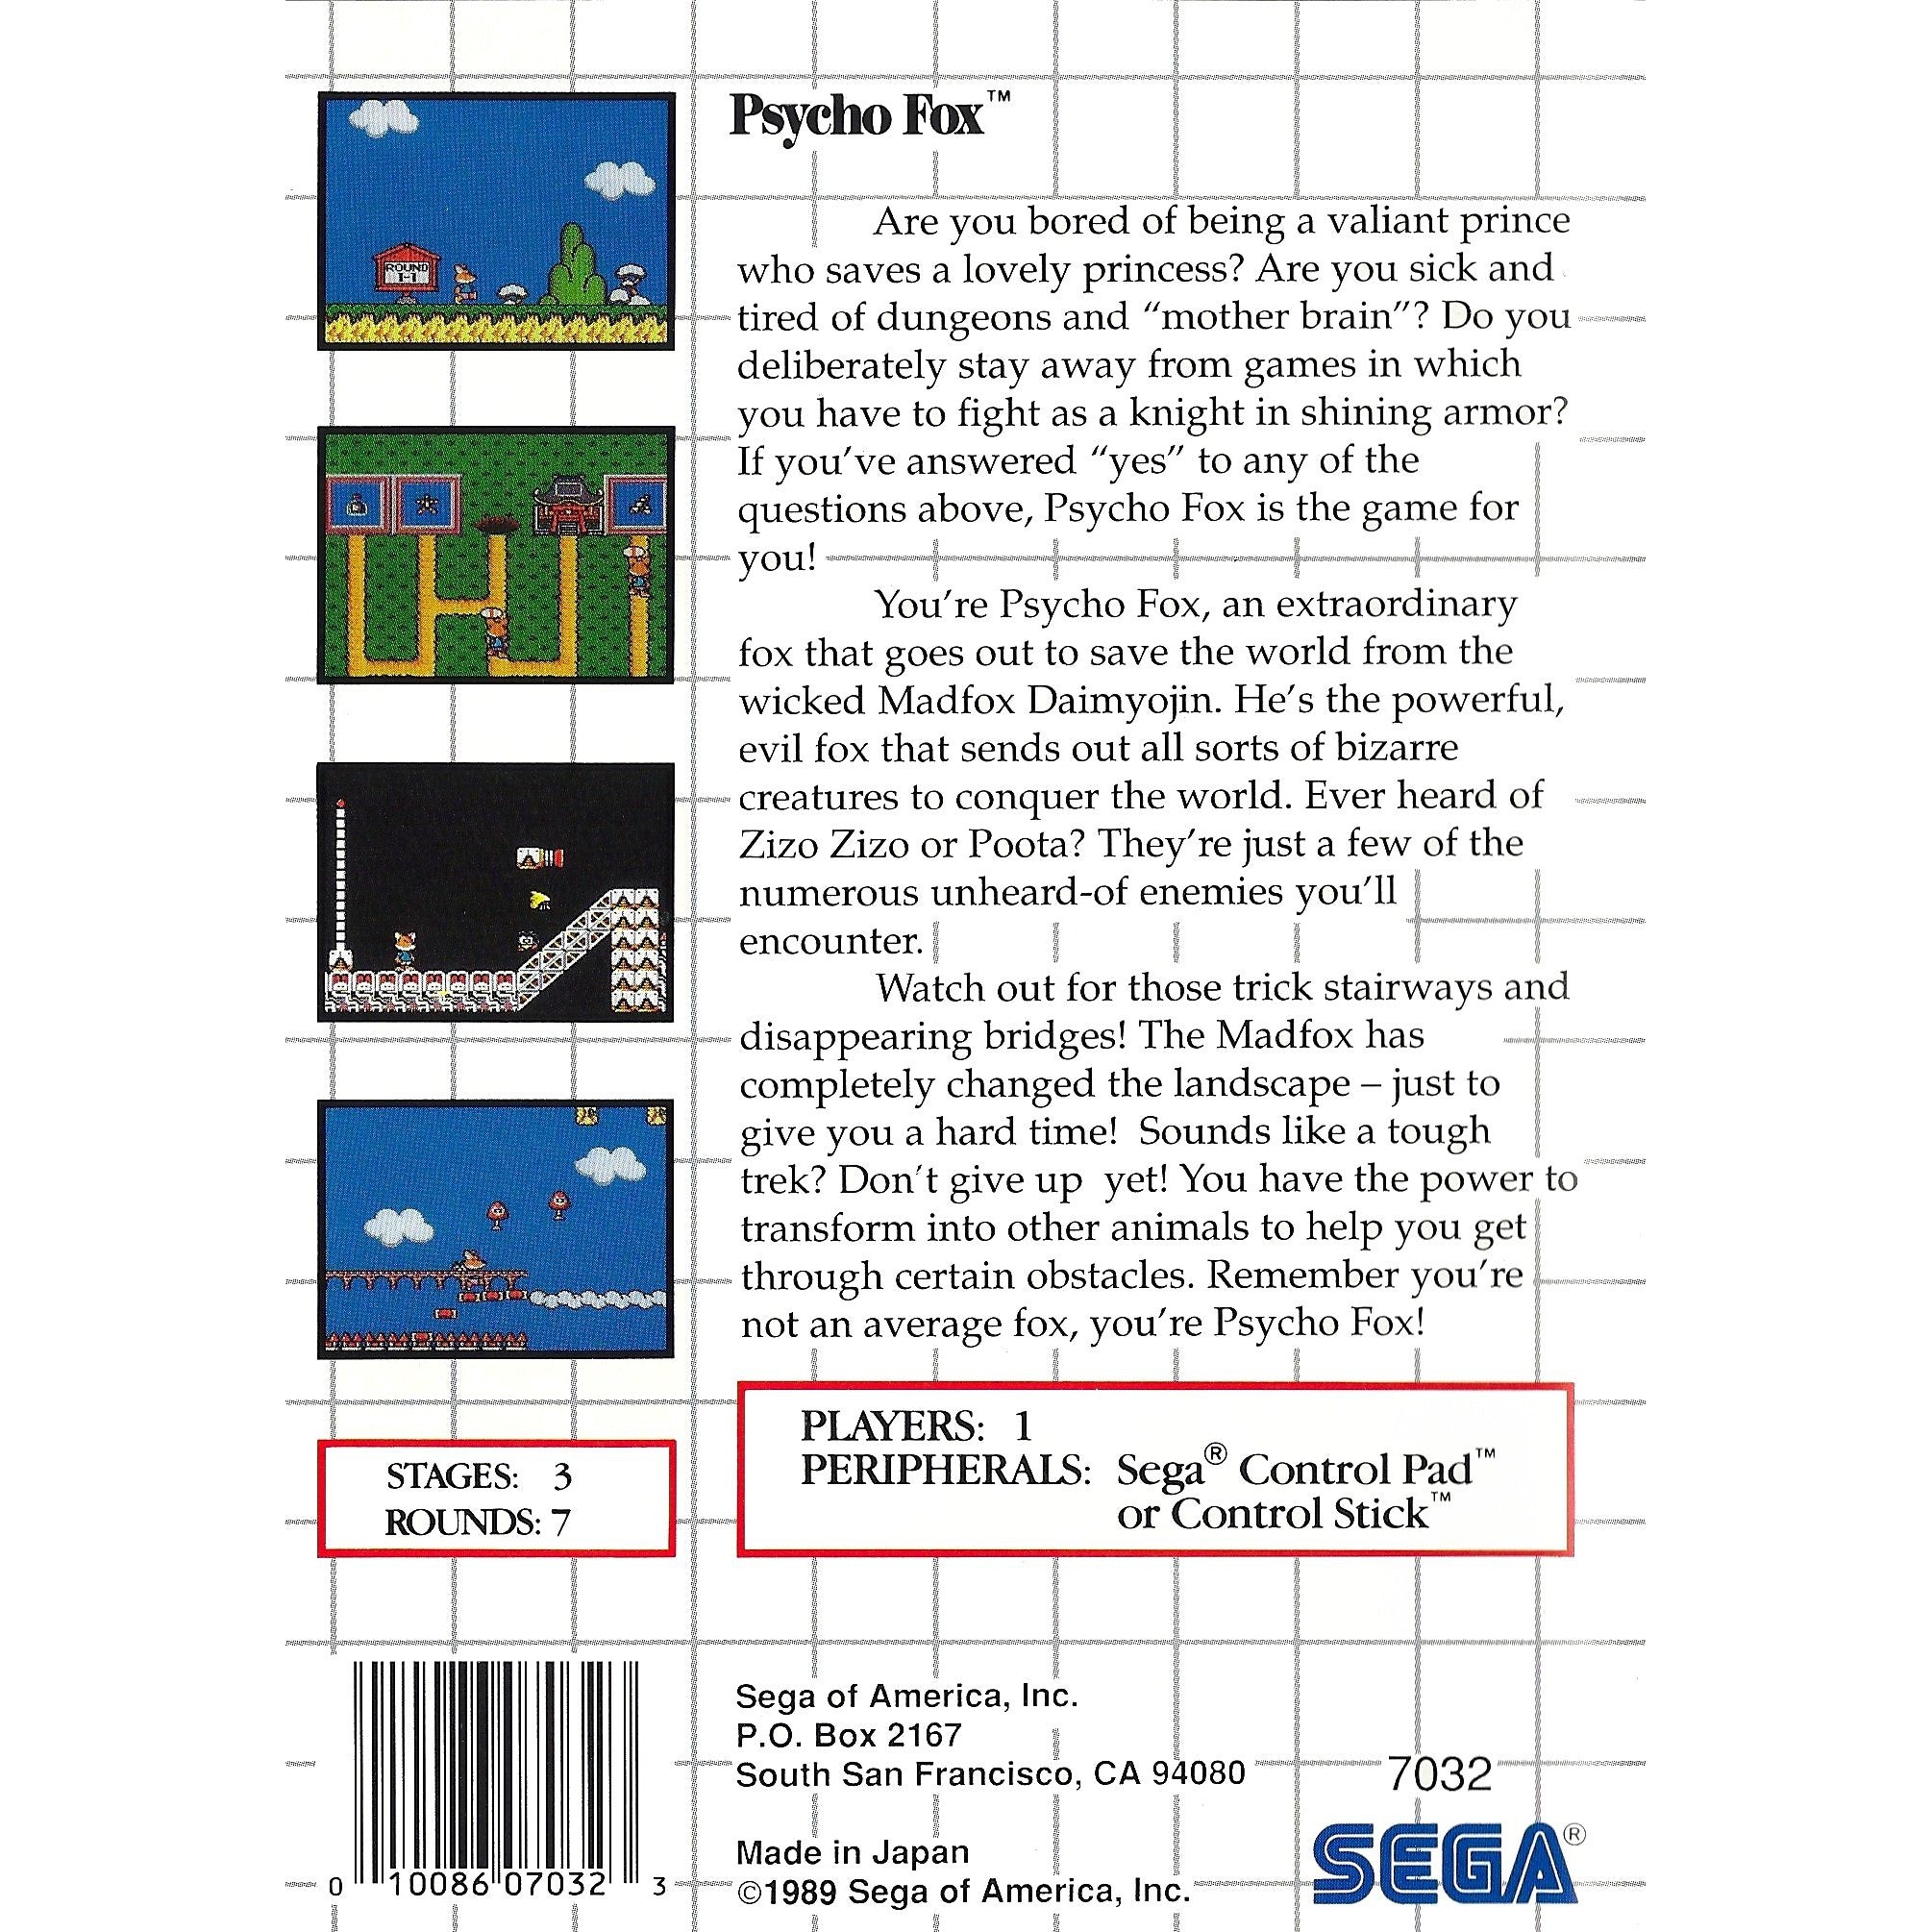 Psycho Fox (Misprint Cart) - Sega Master System Game Complete - YourGamingShop.com - Buy, Sell, Trade Video Games Online. 120 Day Warranty. Satisfaction Guaranteed.